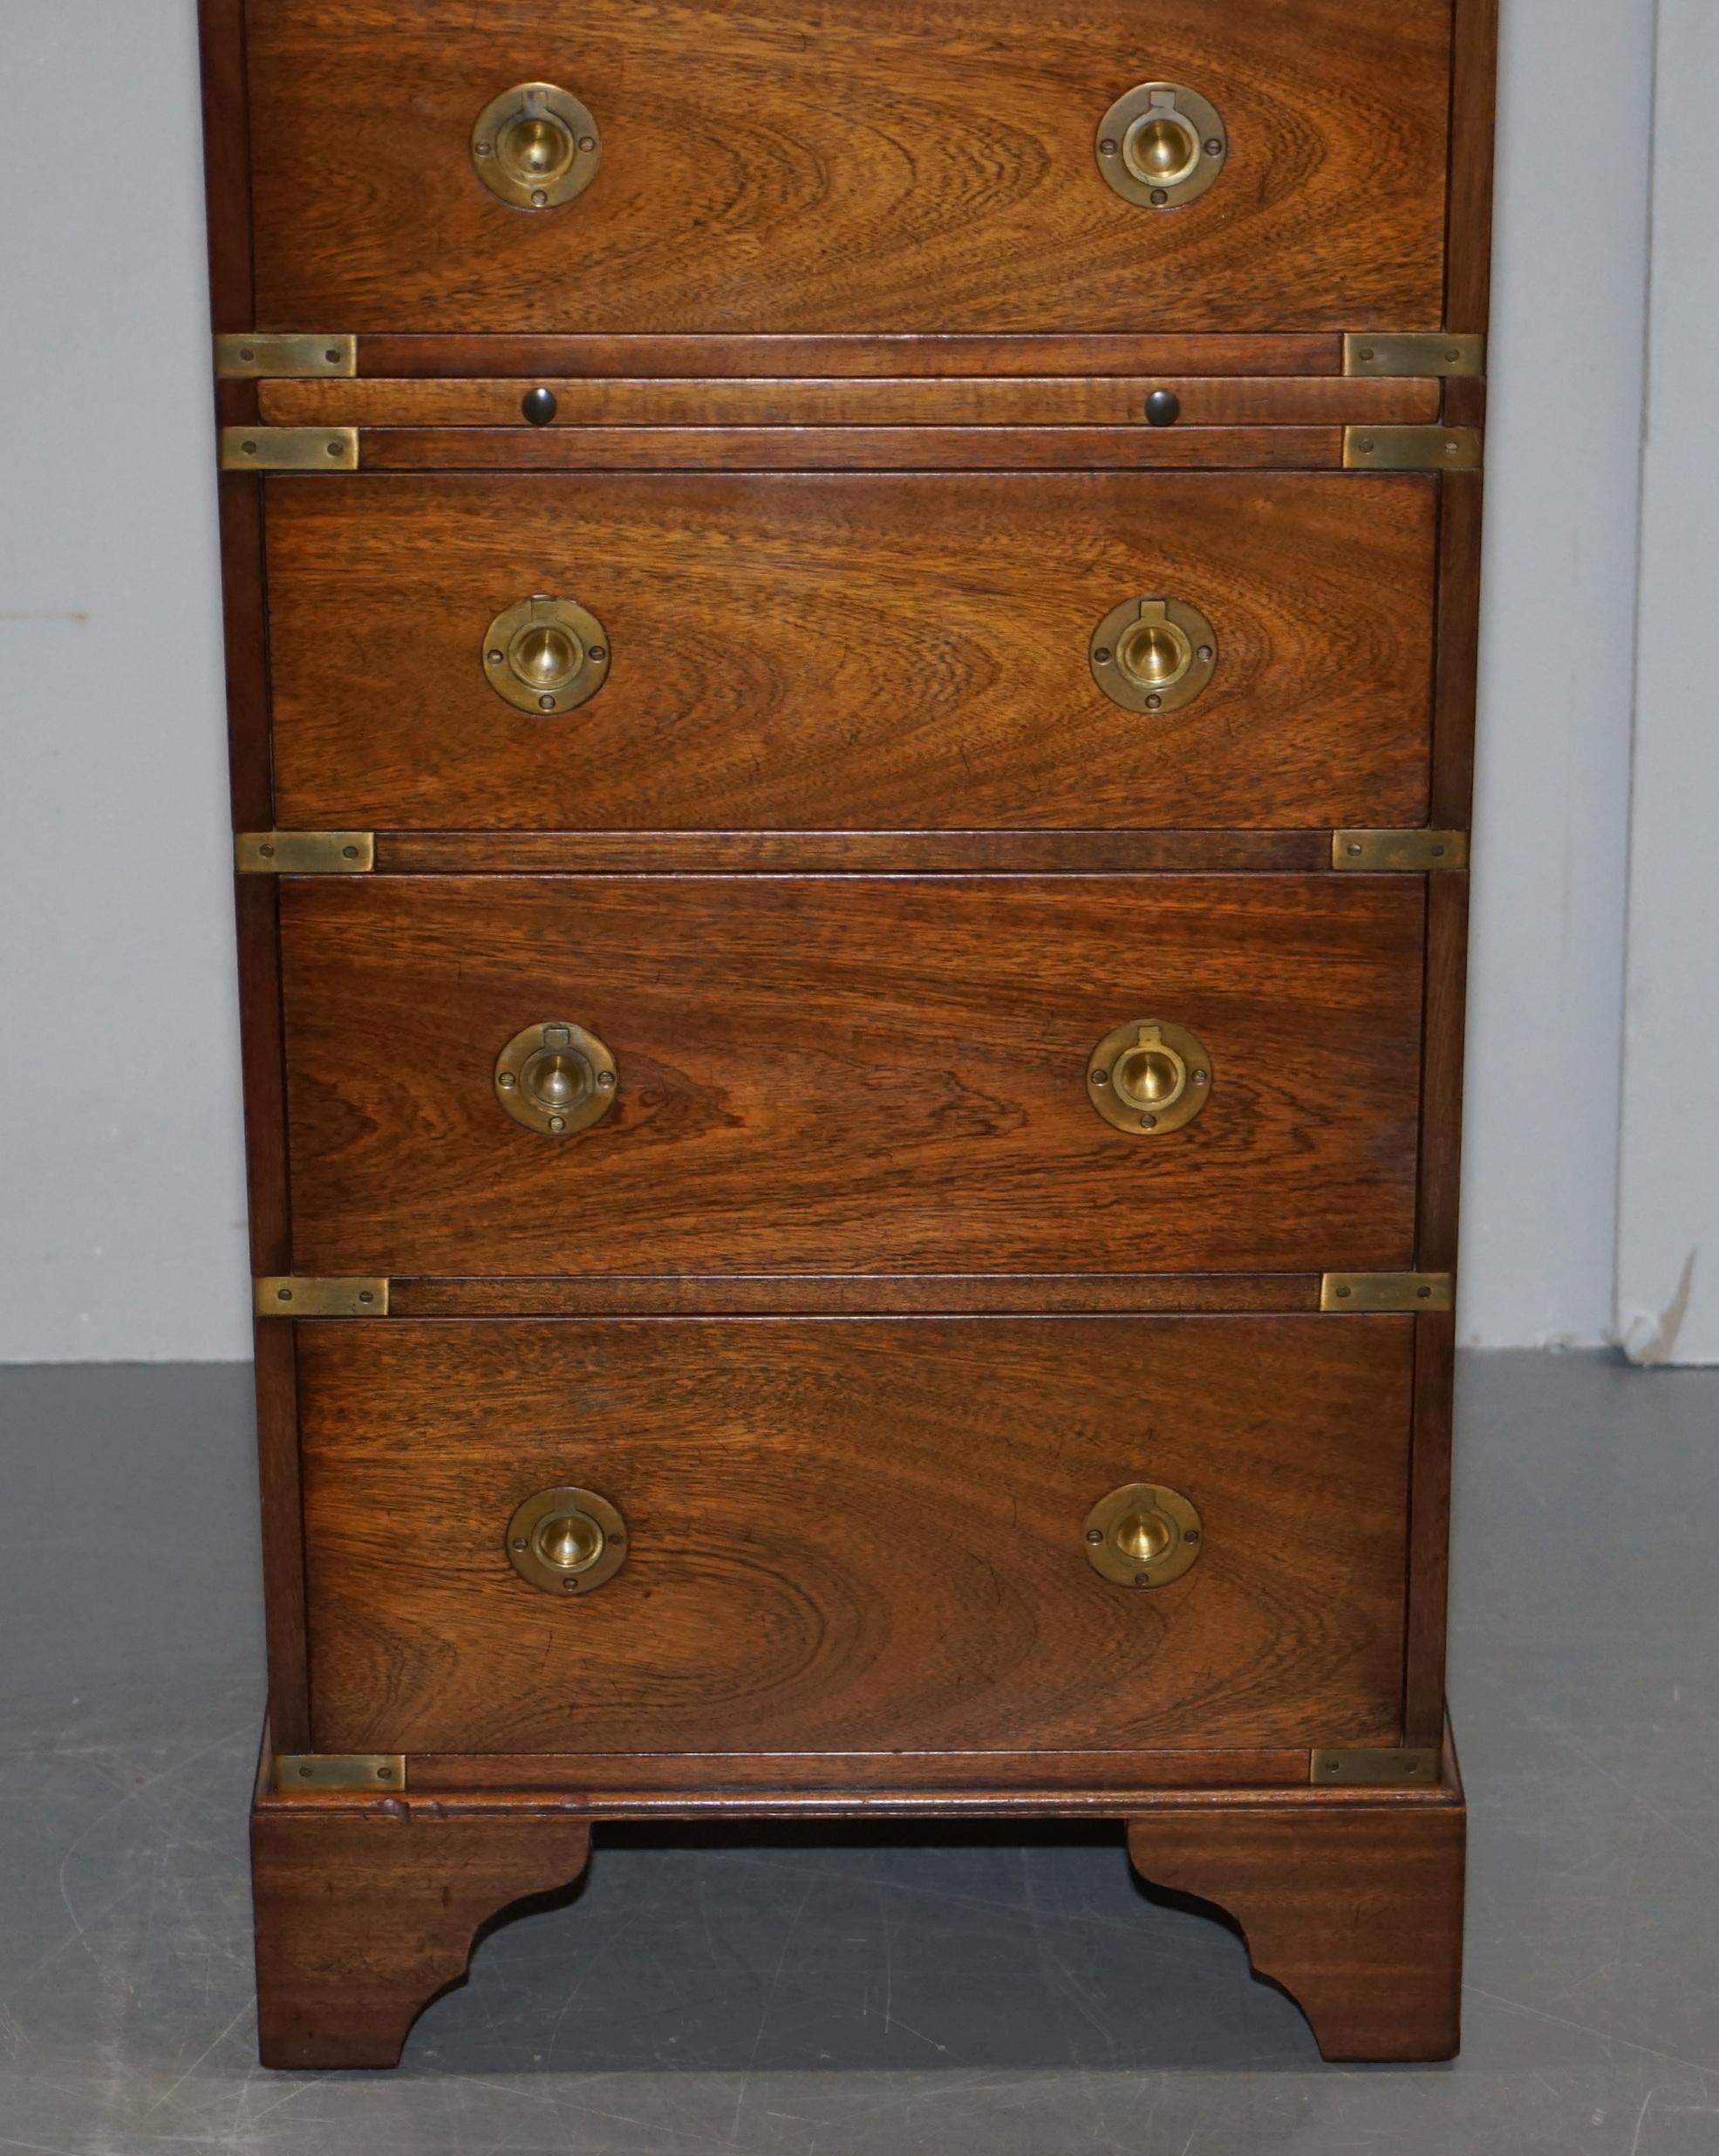 reproduction campaign chest of drawers